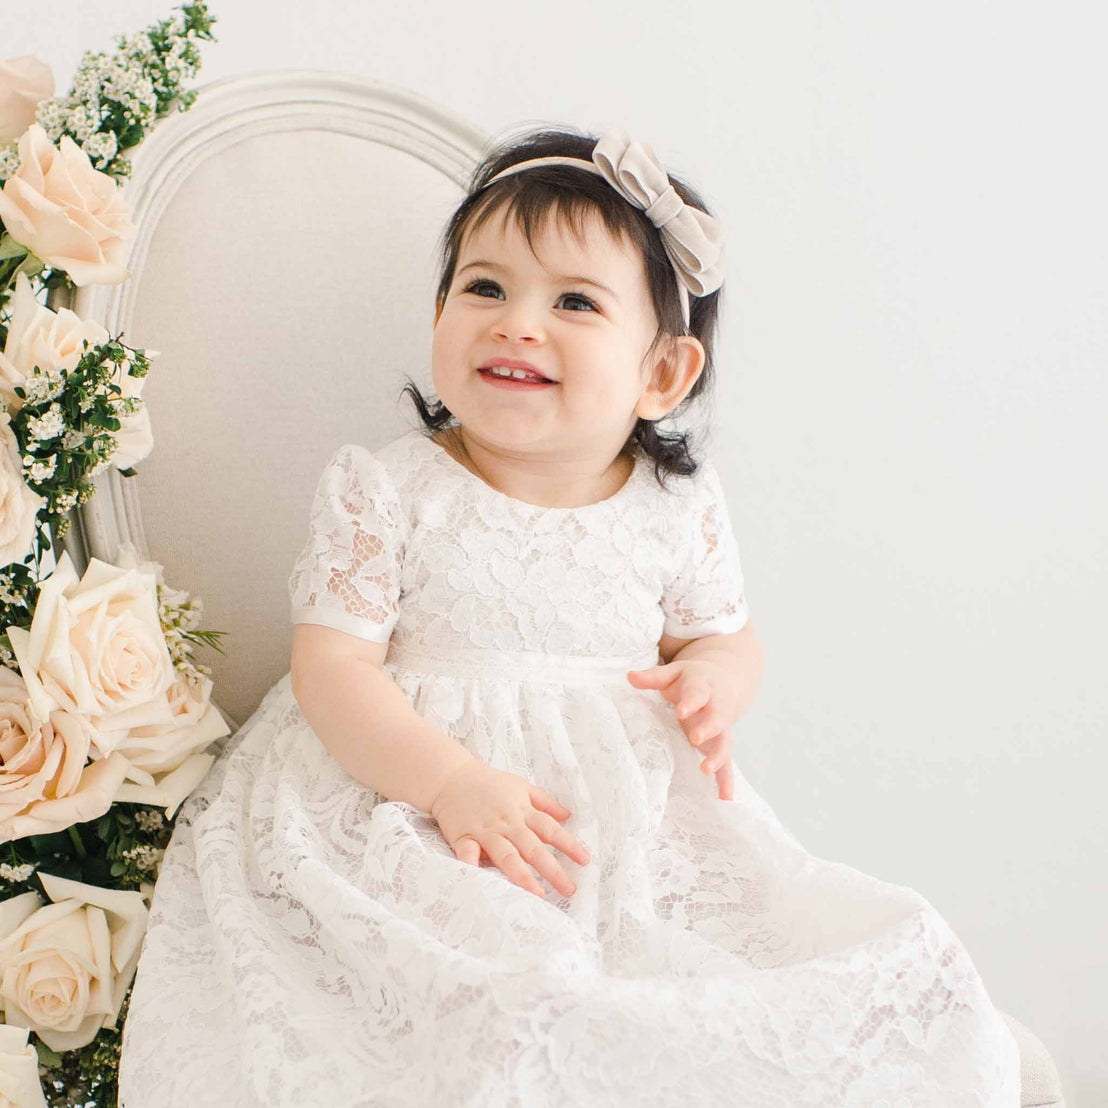 A joyful toddler in a white lace dress sitting beside a chair adorned with cream roses, smiling and looking to the side. She wears a matching Rose Velvet Bow Headband.